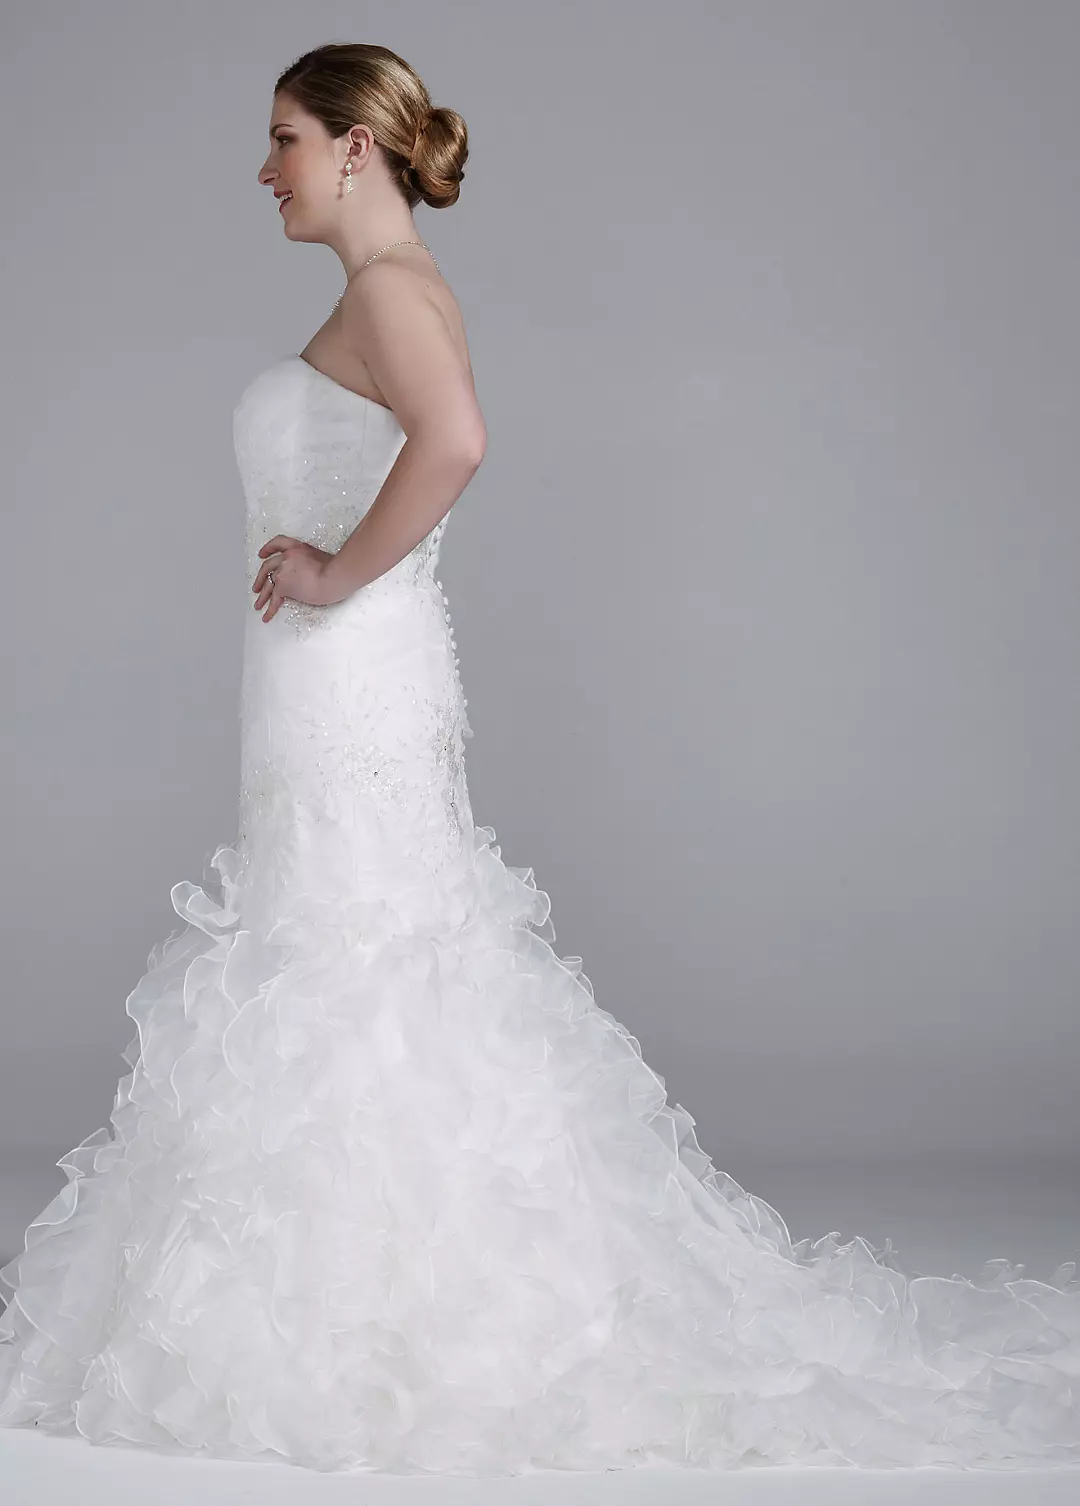 Wedding Gown with Lace Appliques and Ruffled Skirt Image 3